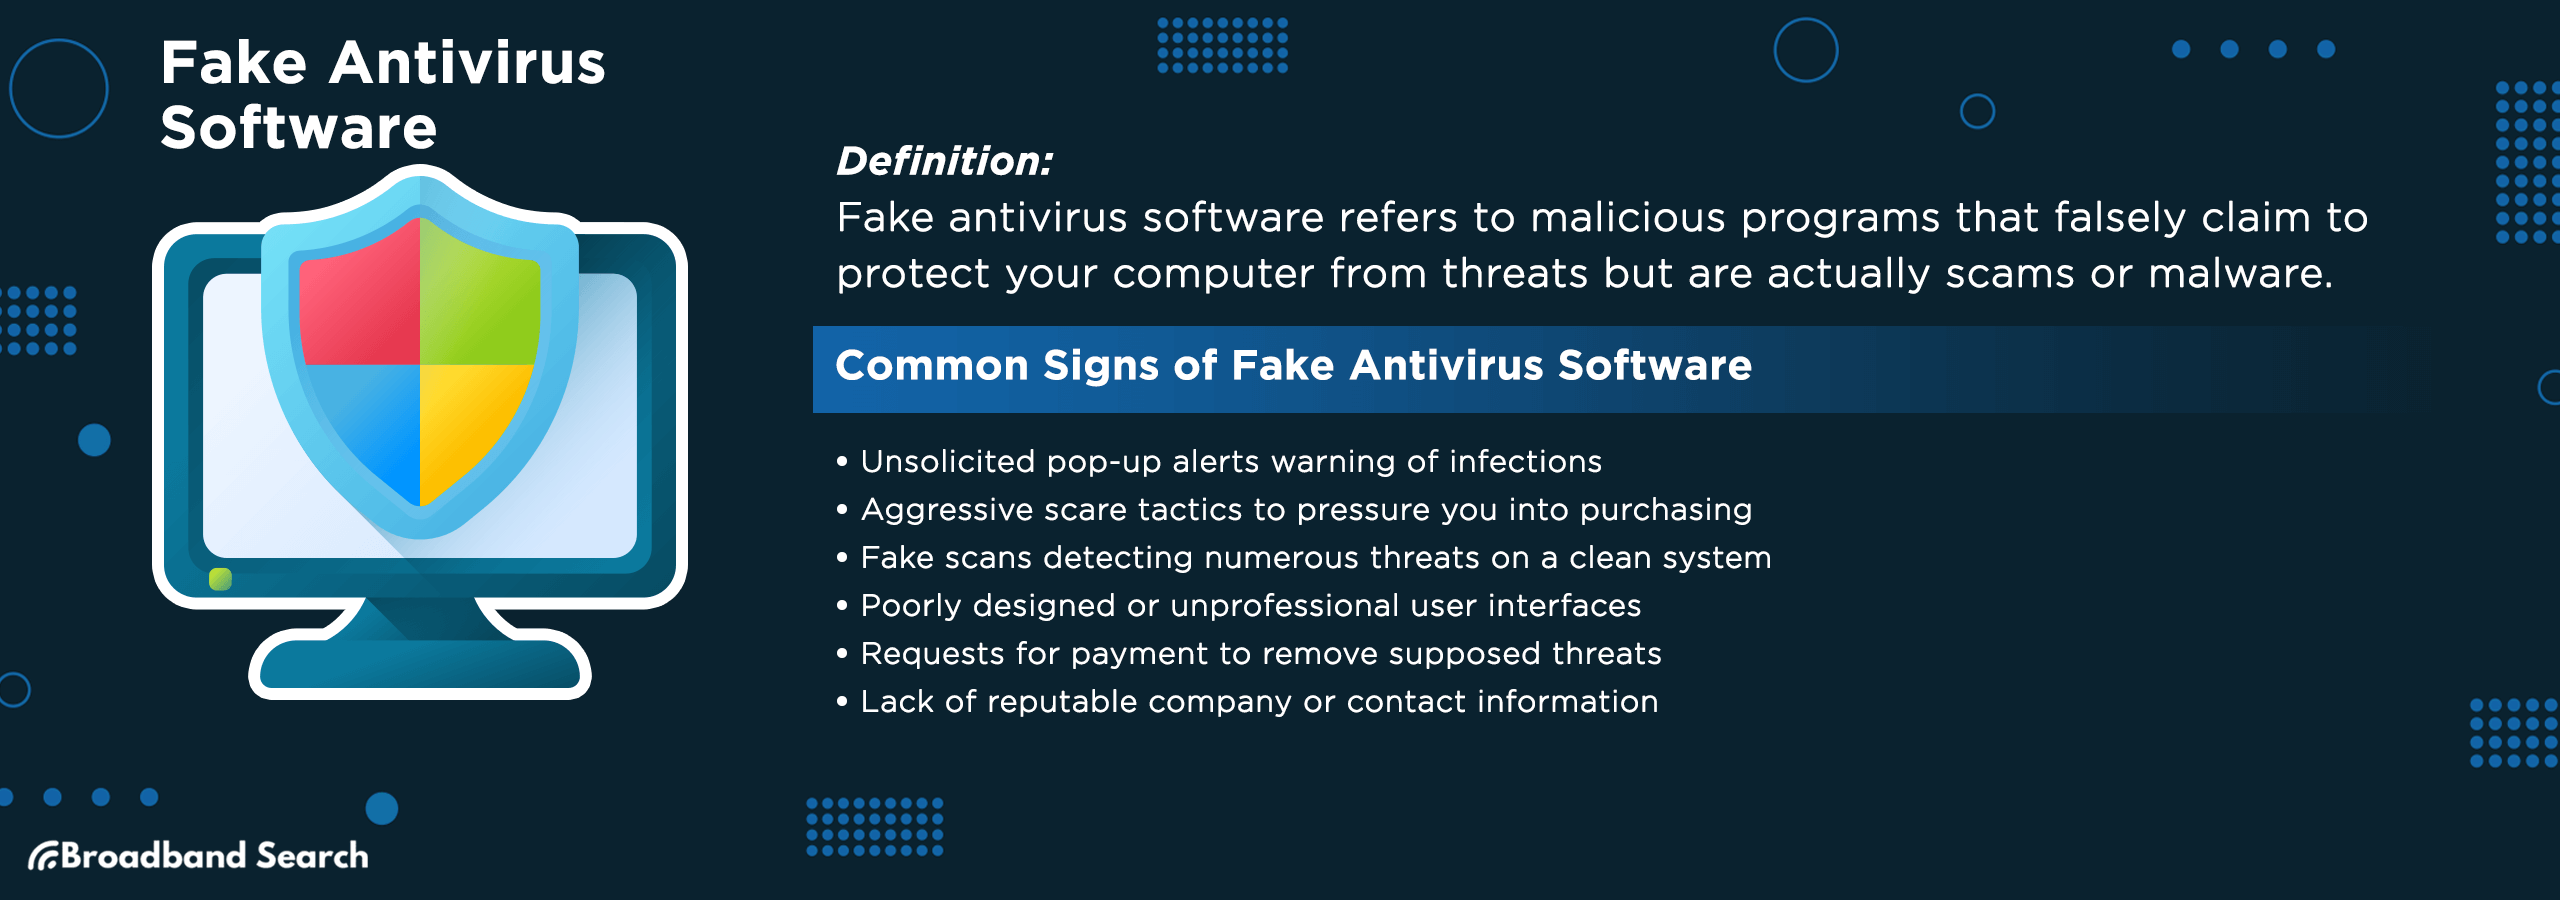 Definition and signs of fake antivirus software scams